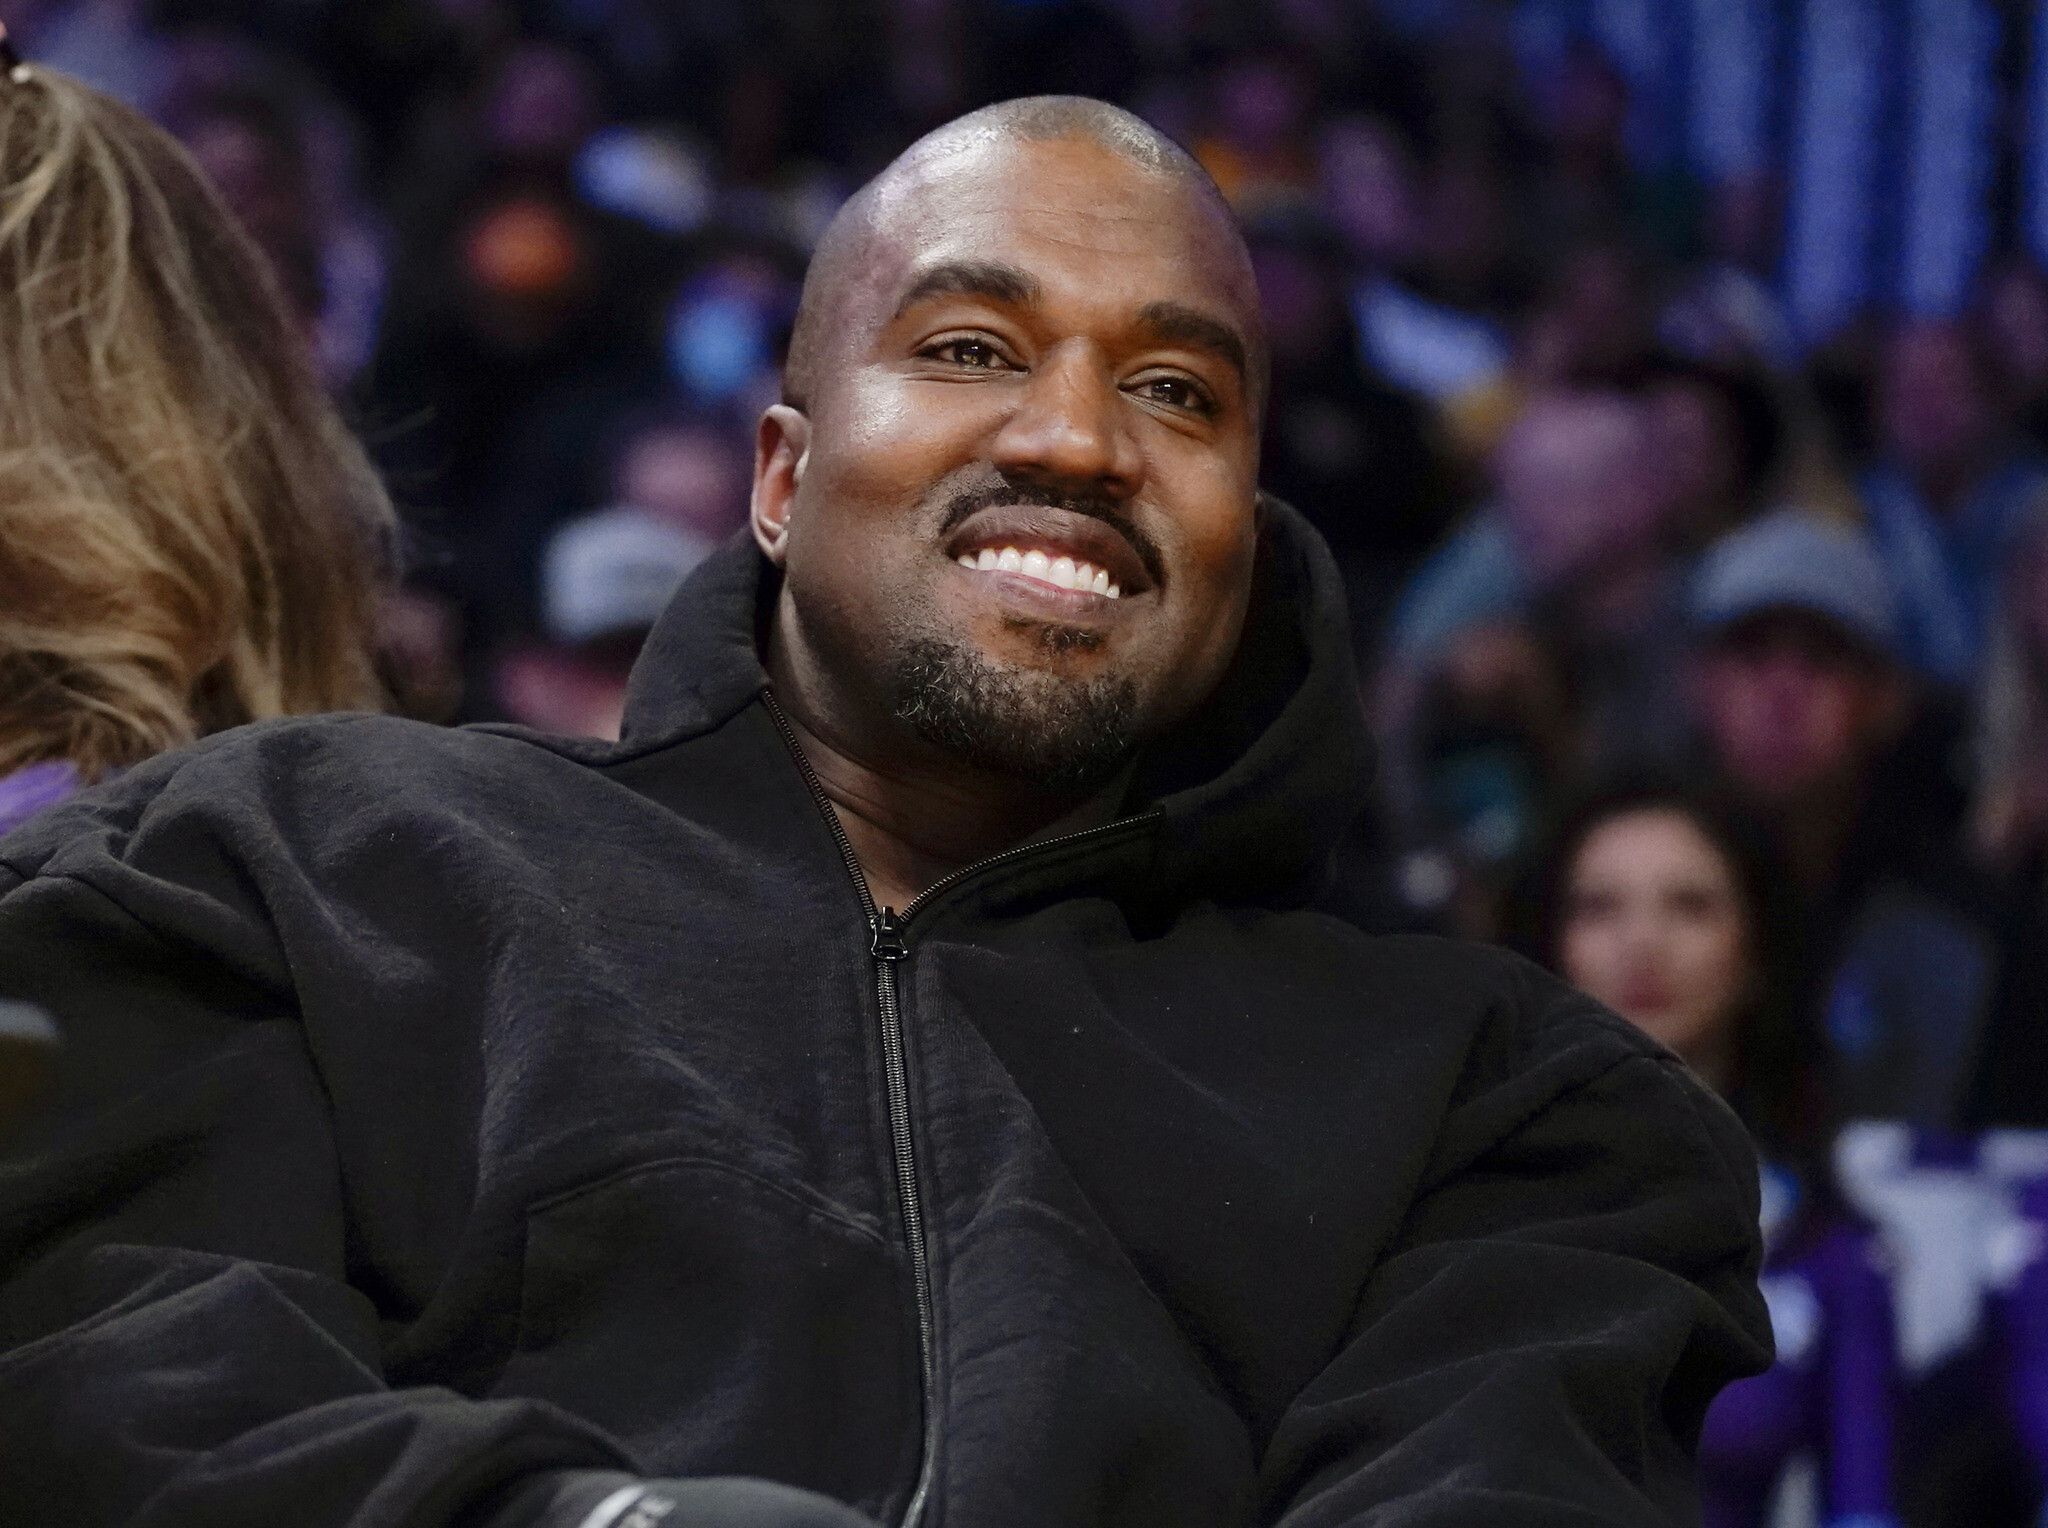 Kanye West - Albums, Songs, and News